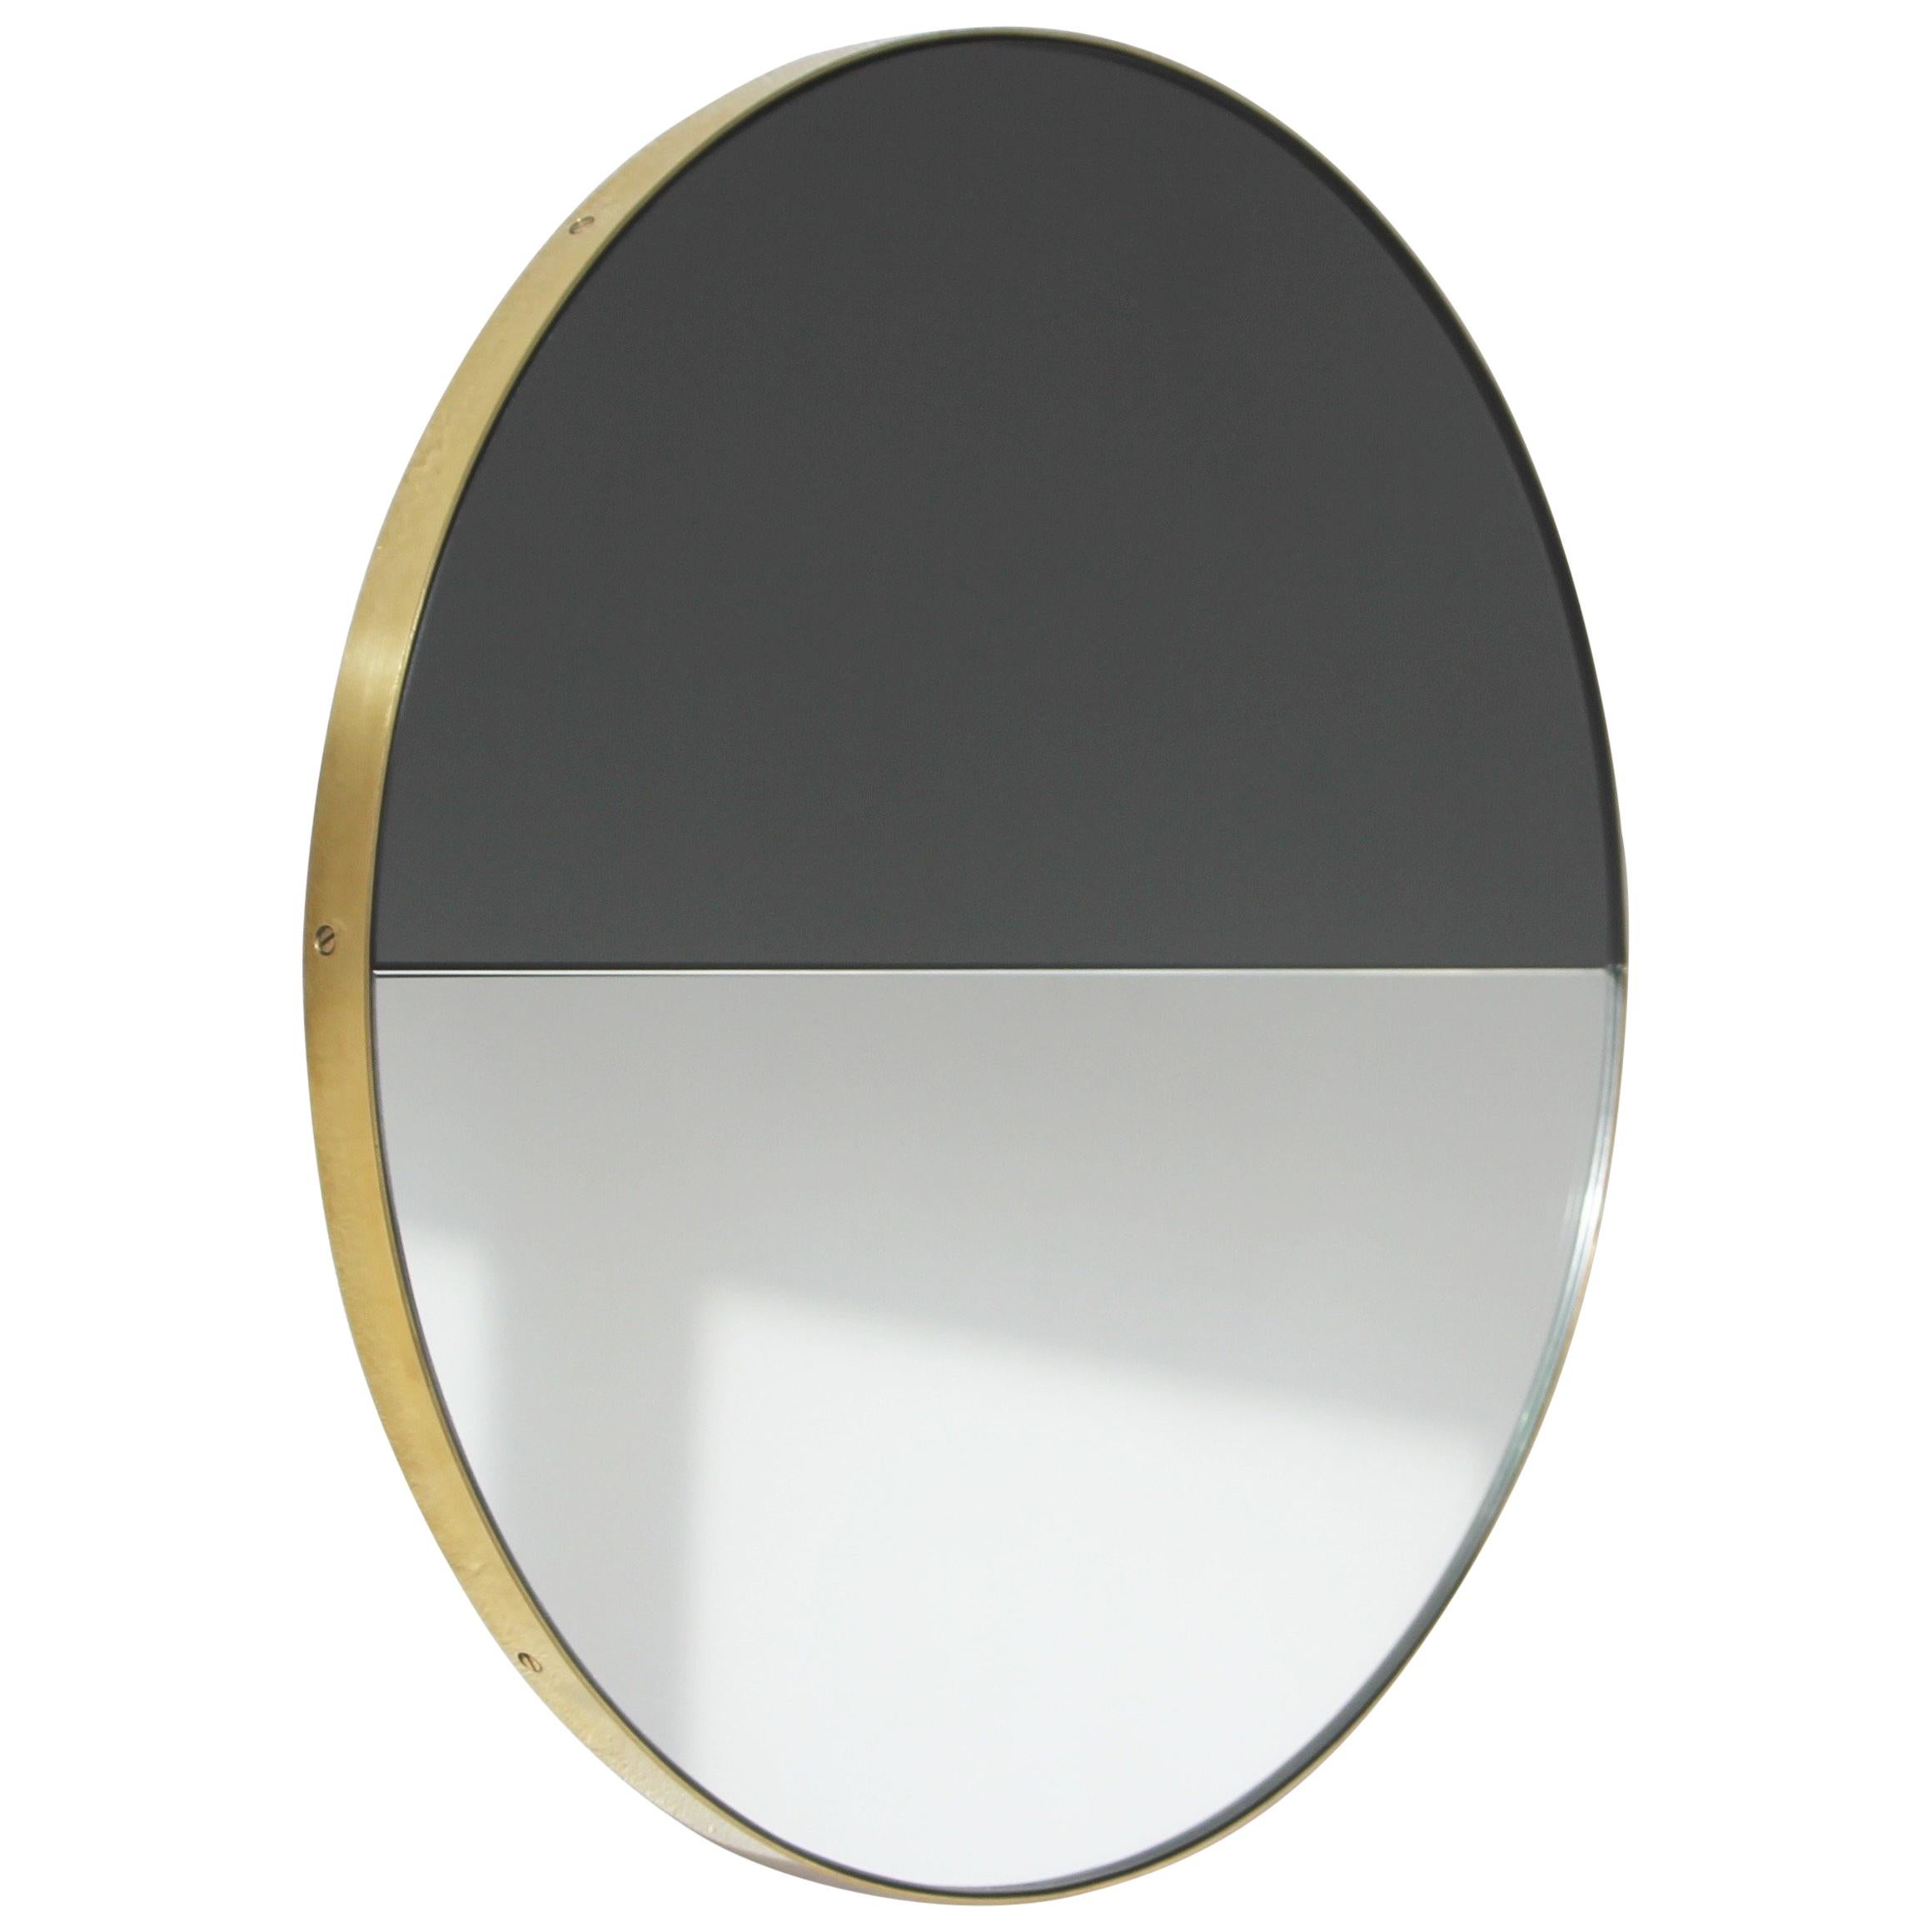 Orbis Dualis Mixed Tint Contemporary Round Mirror with Brass Frame, Regular